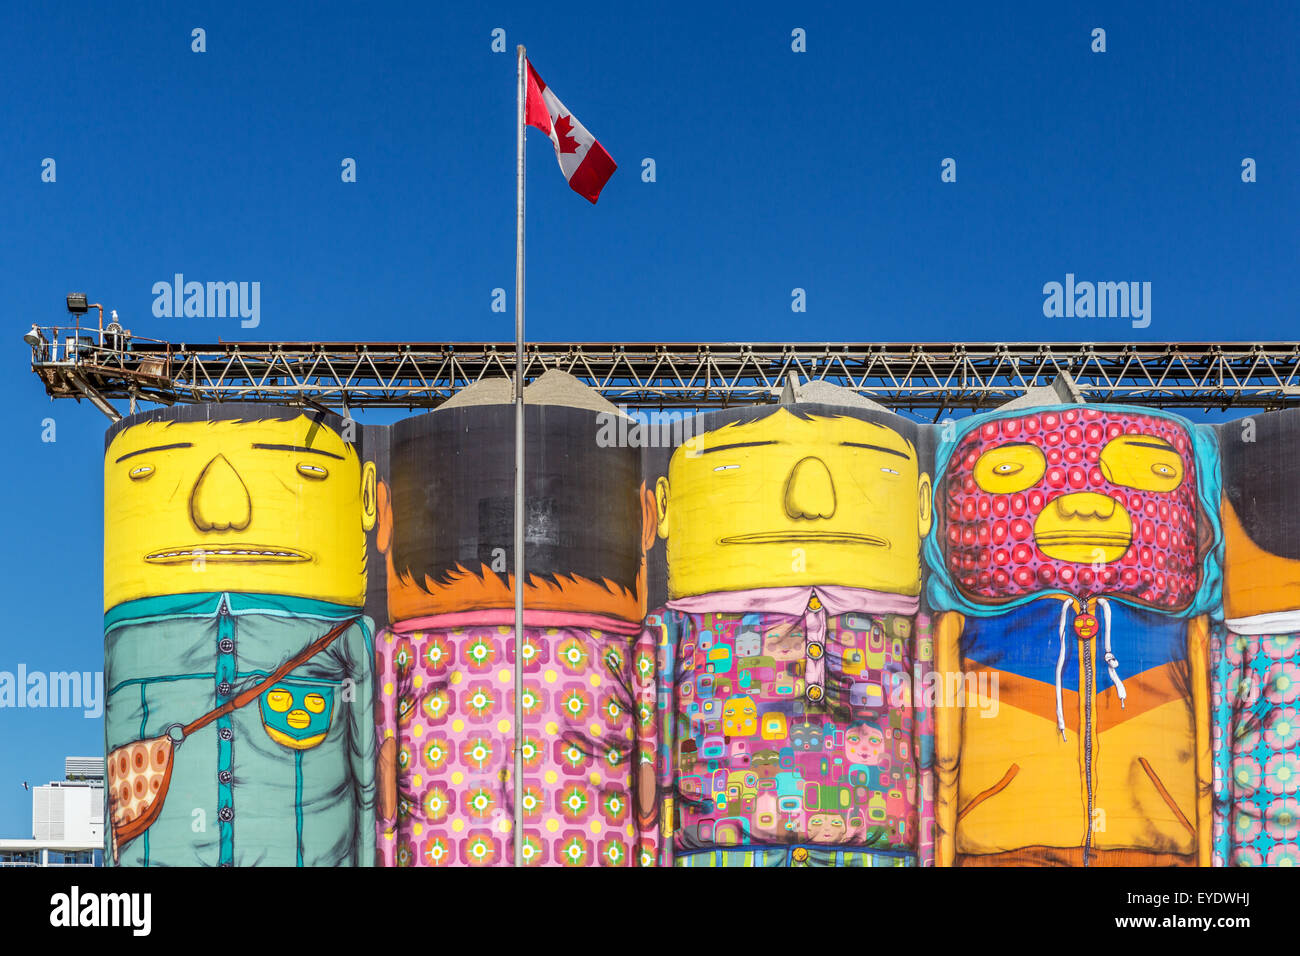 Ocean Concrete silos painted by Os Gemeos, Granville Island, Vancouver, British Columbia, Canada Stock Photo